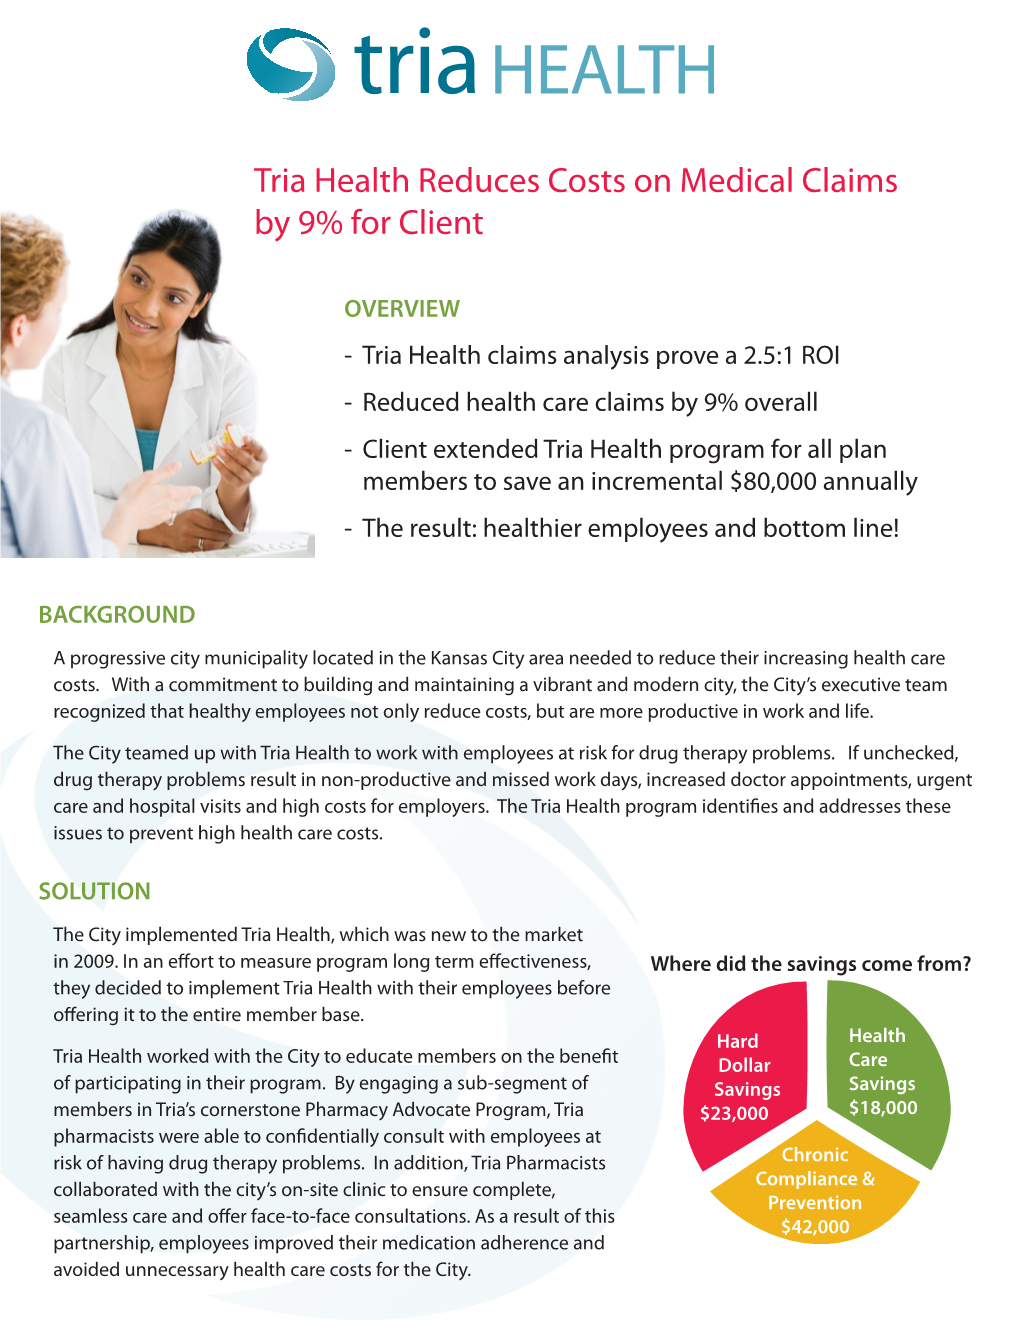 Tria Health Reduces Costs on Medical Claims by 9% for Client